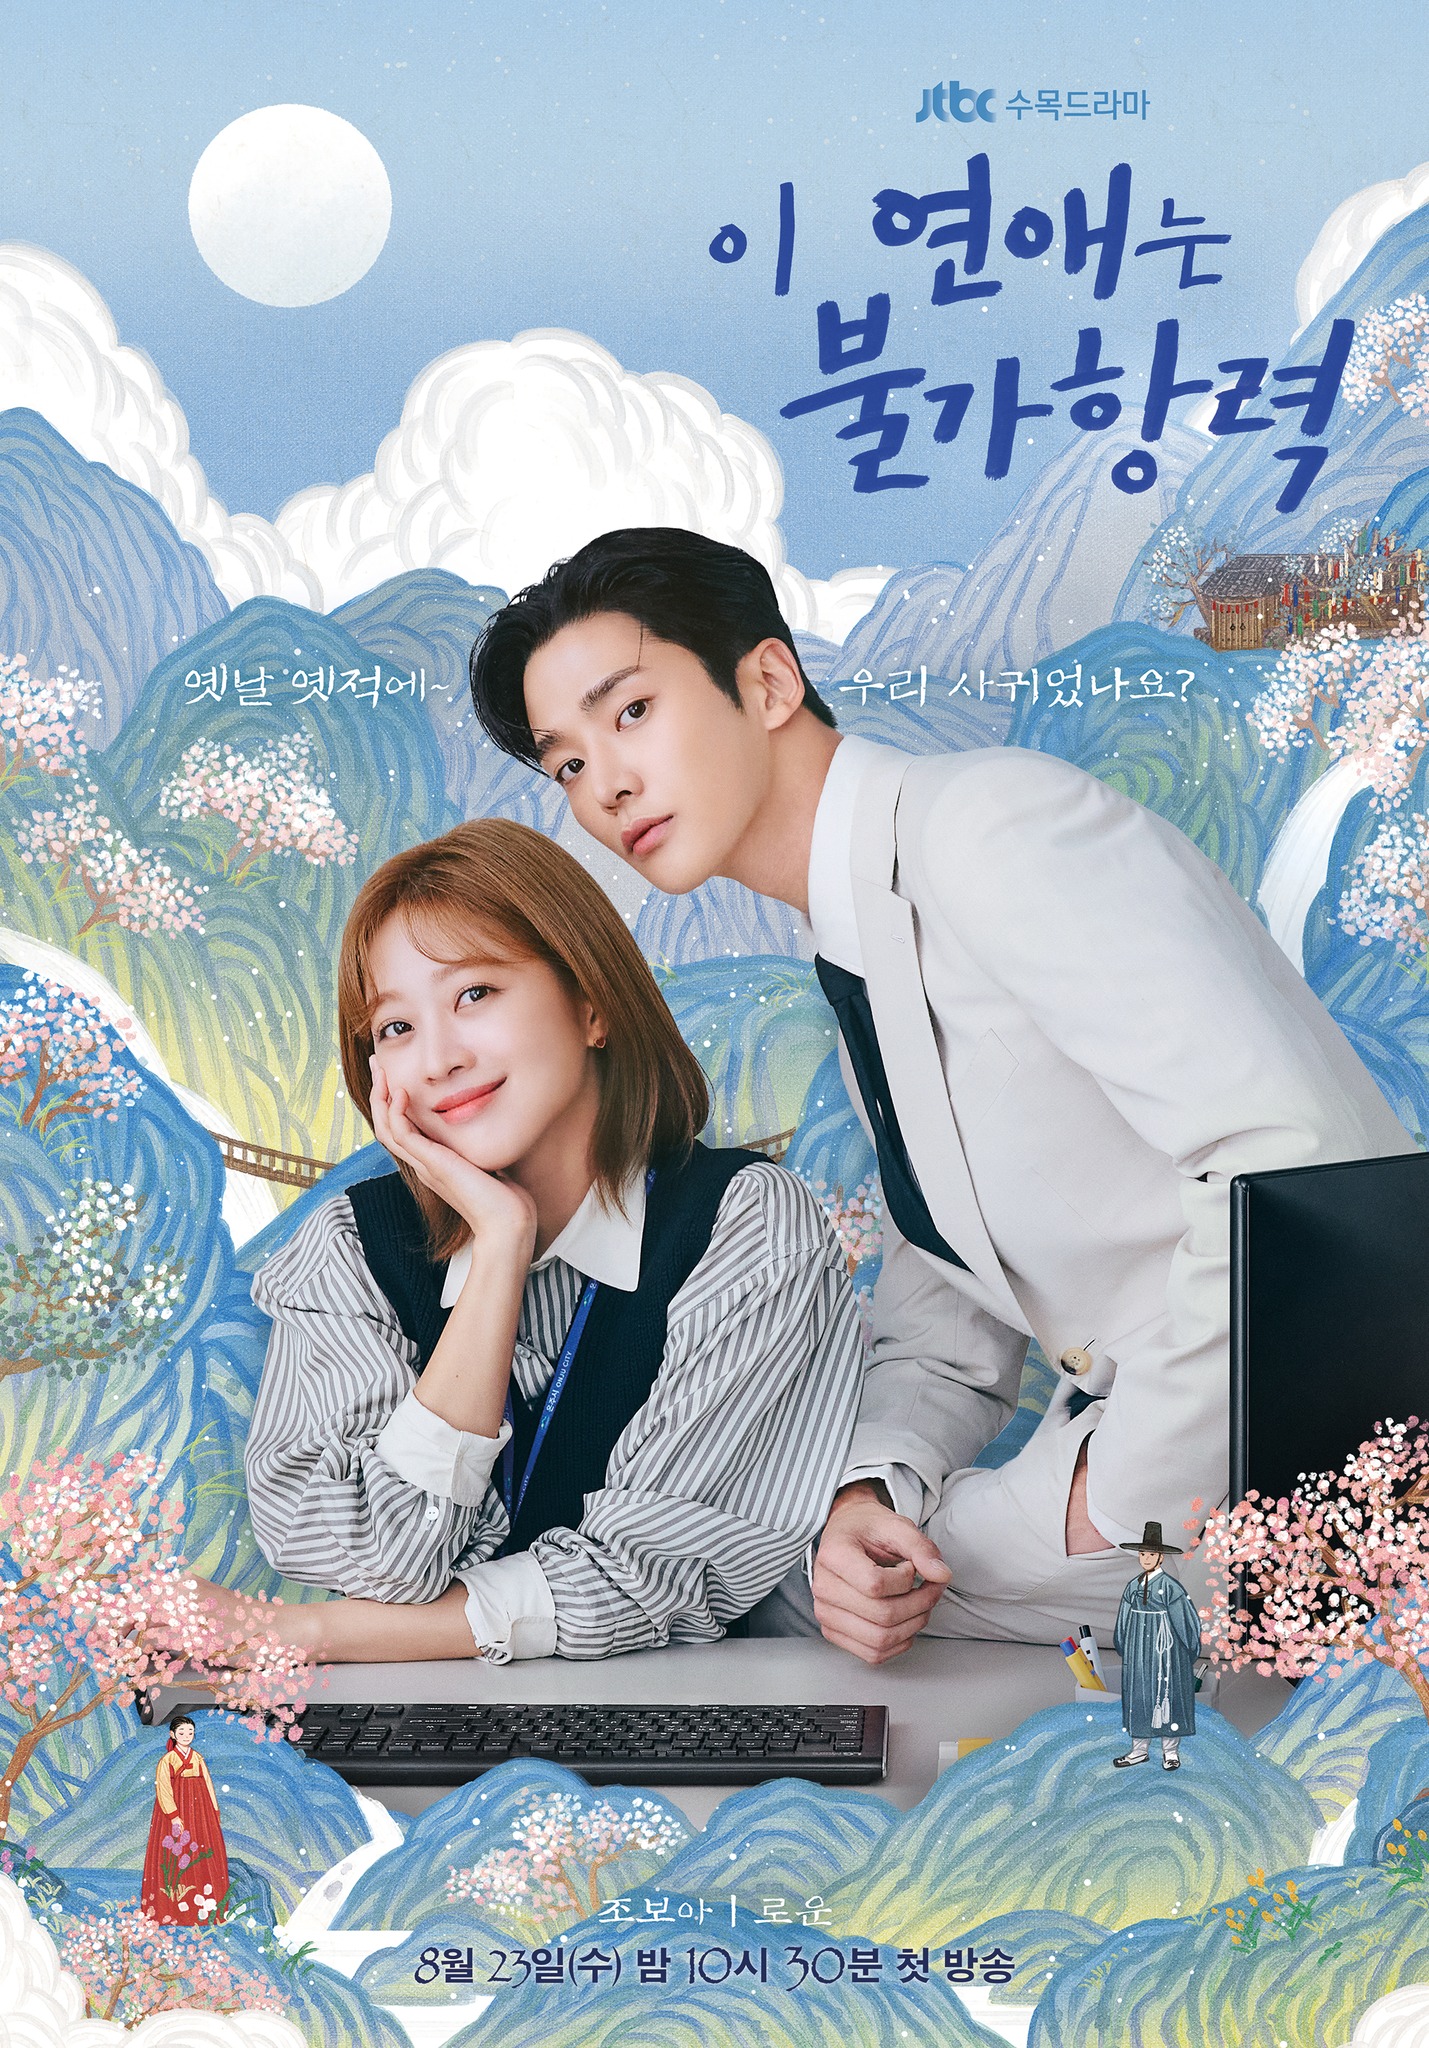 Destined With You - Unspoiled Review